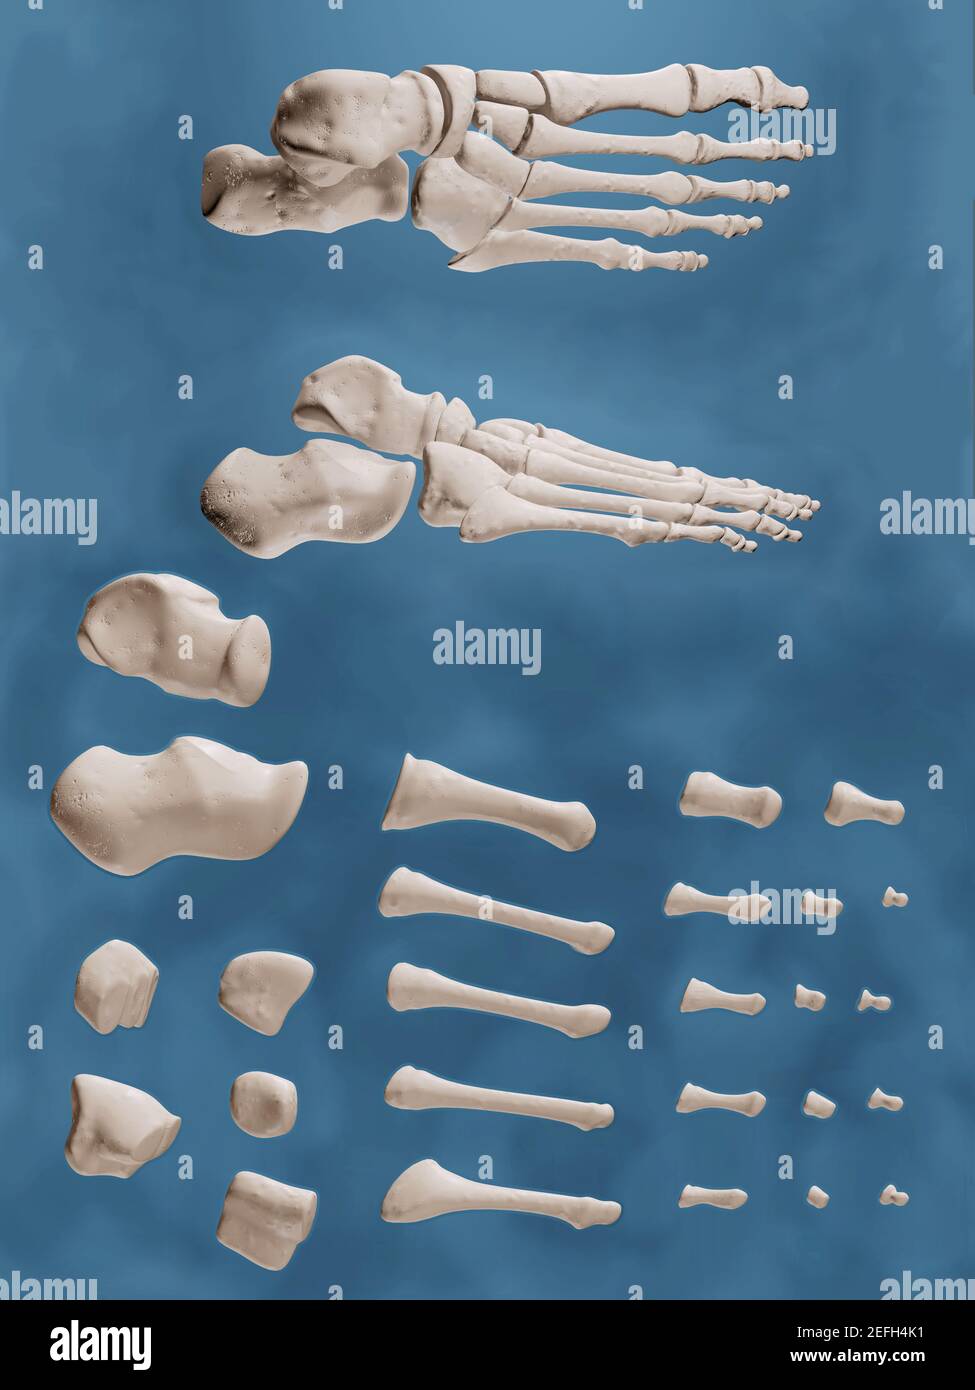 Classroom-ready poster showing bones of the foot in anatomical and exploded views. Stock Photo